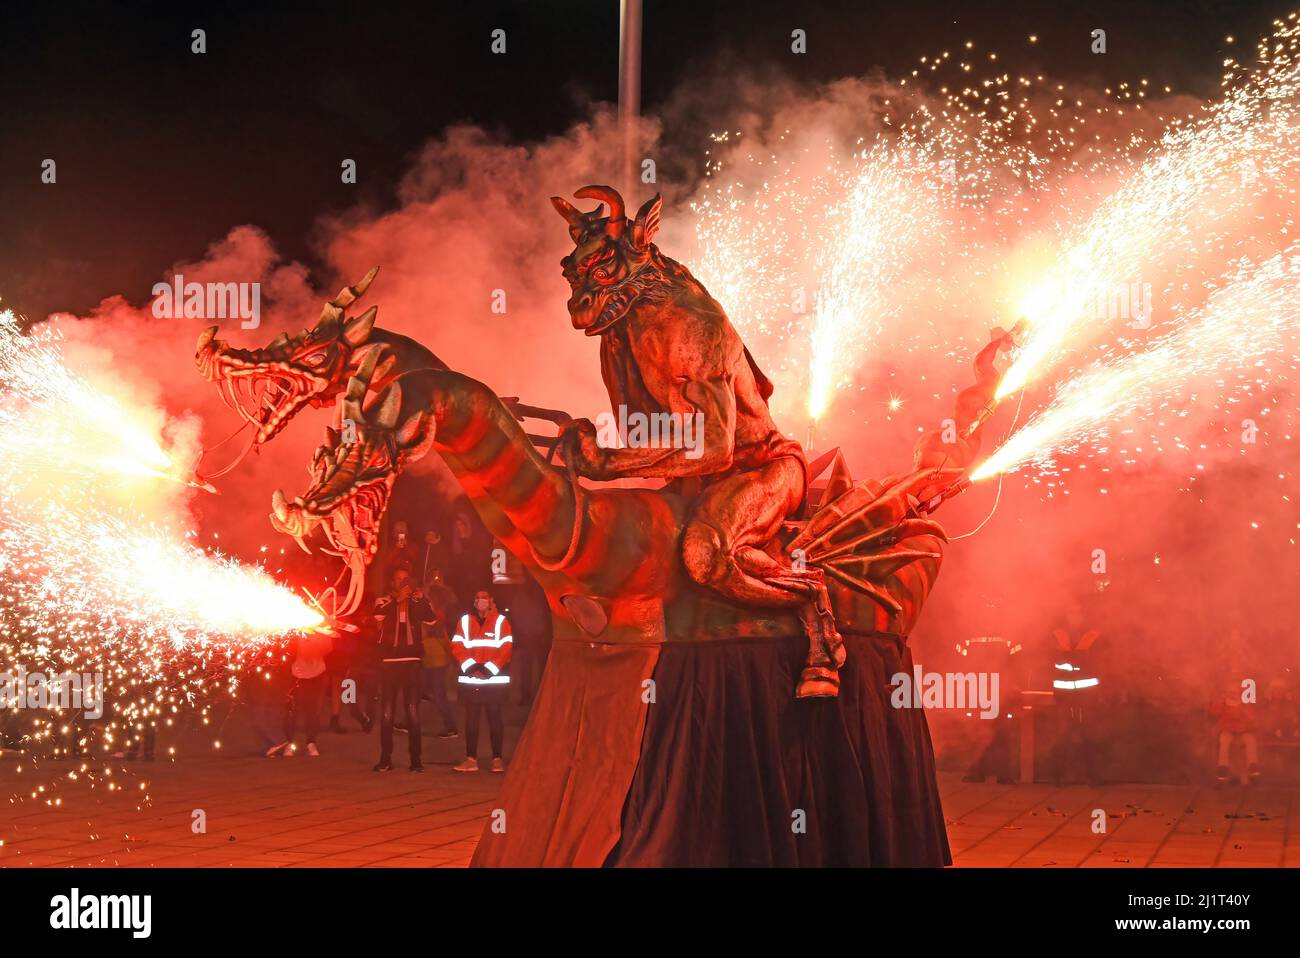 Vendrell, Spain. 5th Jan, 2022. A demonstrator carries a creature in the shape of a dragon that breathes fire, during the pyrotechnic display in solidarity with Ukrainian refugees in Vendrell. The association ''Drac de Foc El Cabrot de El Vendrell'' (Fire Dragon) acts in a pyrotechnic display in solidarity and support for people of Ukrainian nationality who are refugees in hotels and municipal hostels in the city of Vendrell due to the invasion of Russia of Ukraine, The performance of parades of fire is a Catalan tradition that takes place in towns and cities every year. (Credit Image: © Ram Stock Photo